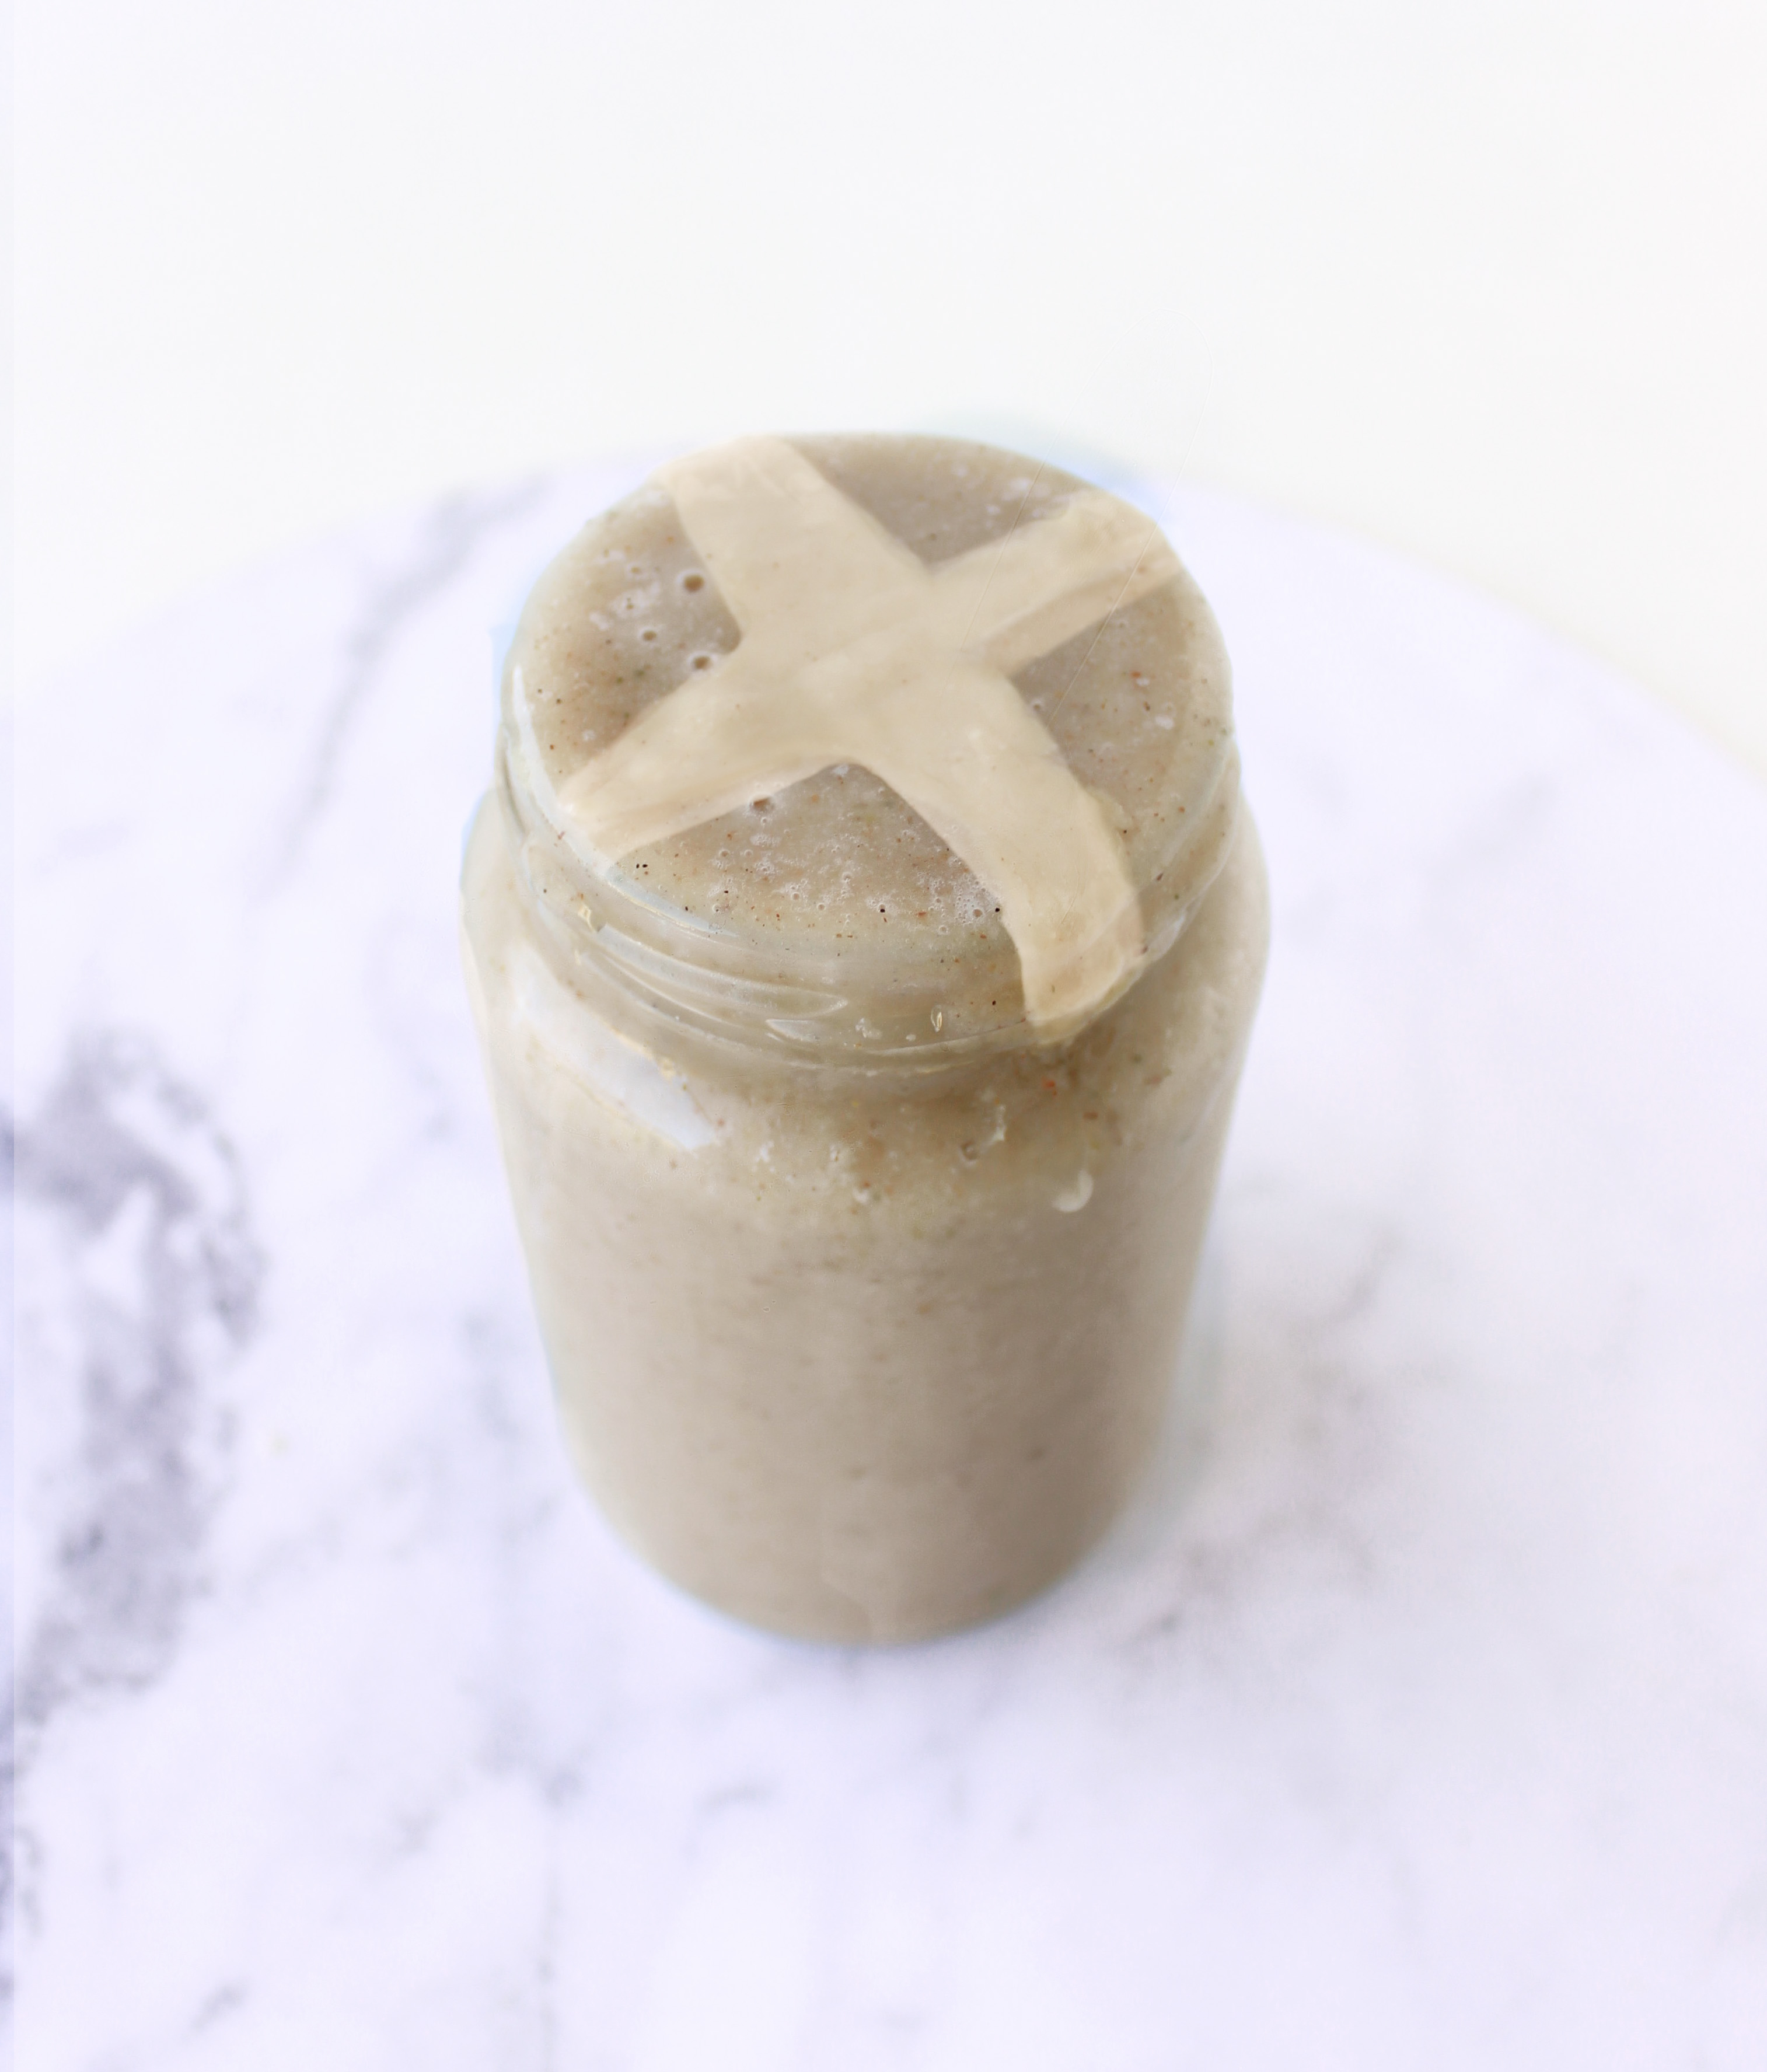 A jar full of delicious, creamy hot cross bun flavoured smoothie.